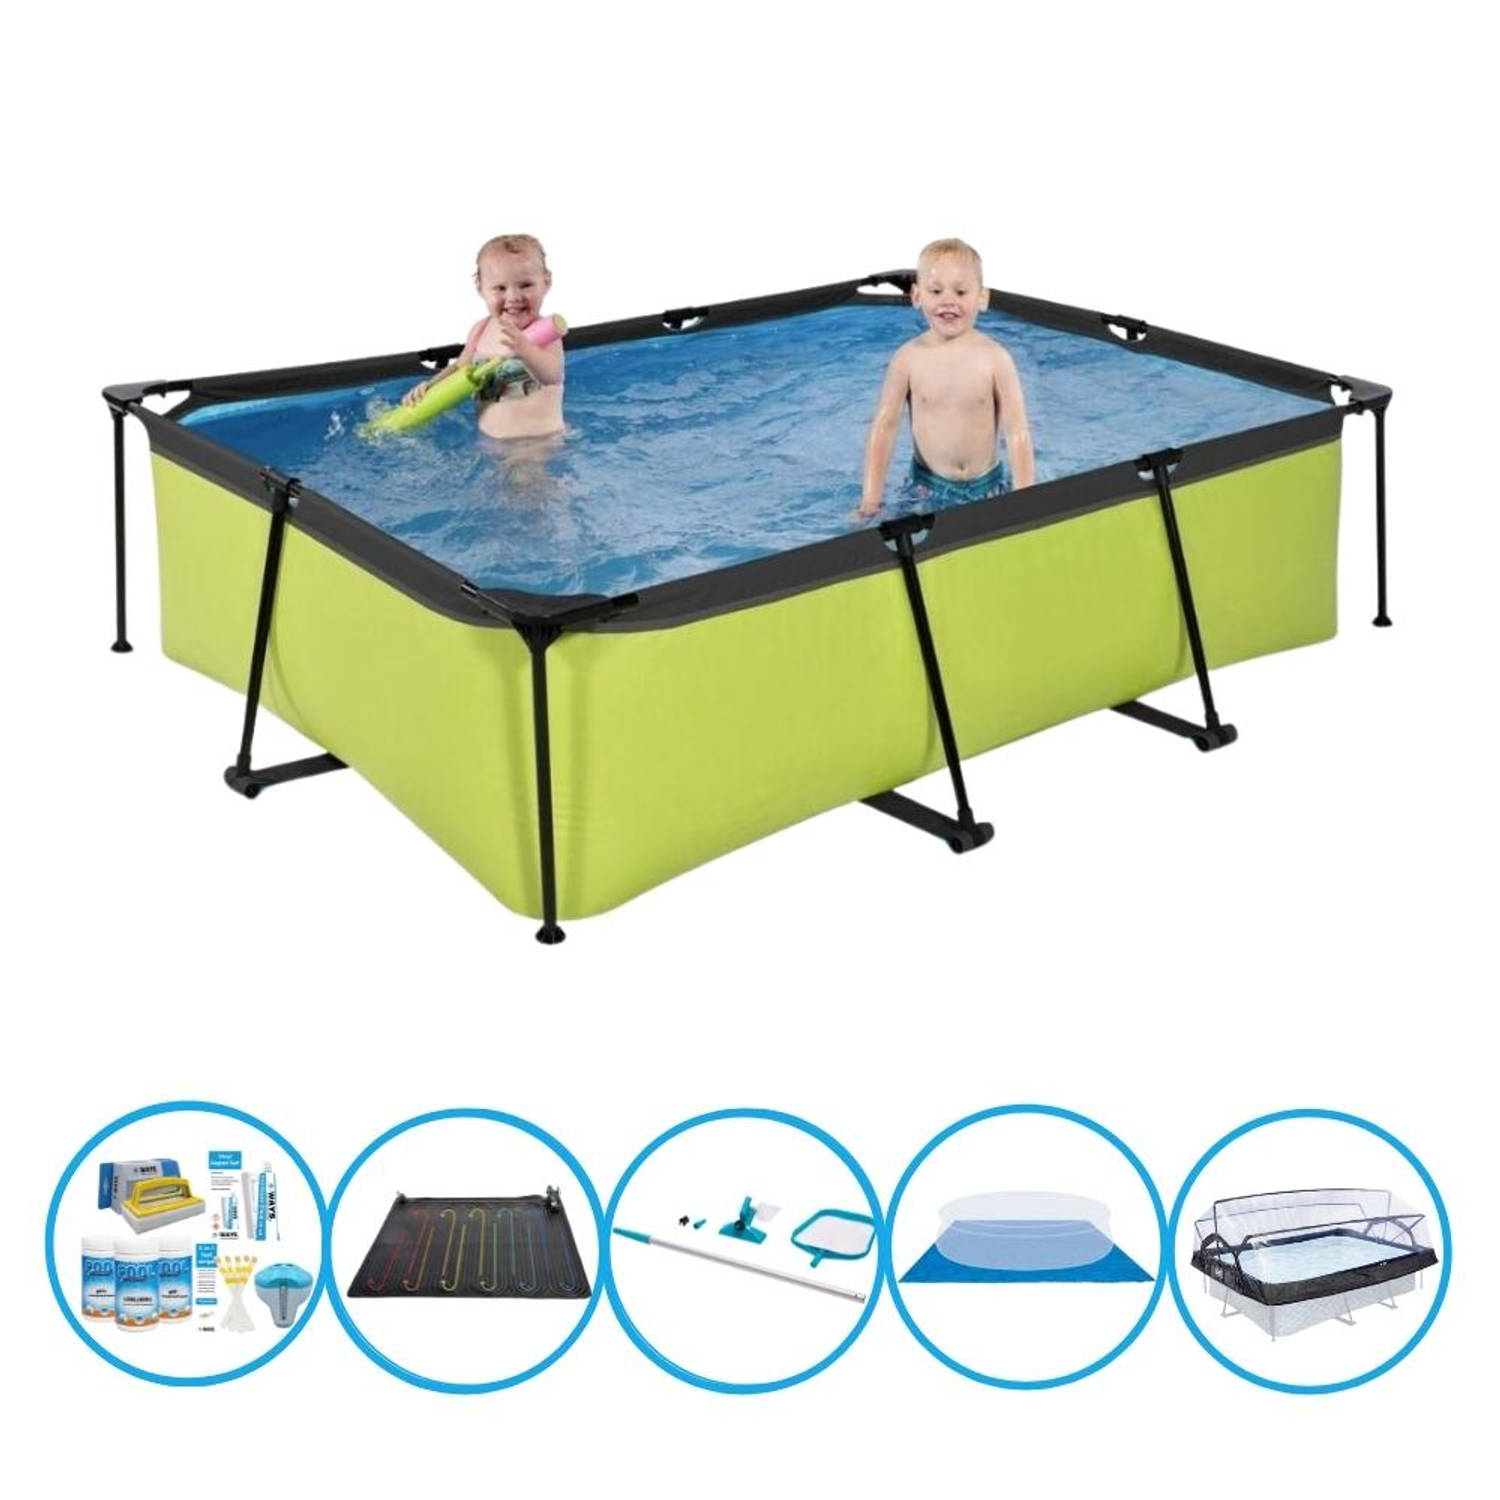 EXIT Toys Exit Zwembad Lime - 220x150x60 Cm - Frame Pool - Inclusief Accessoires - Groen